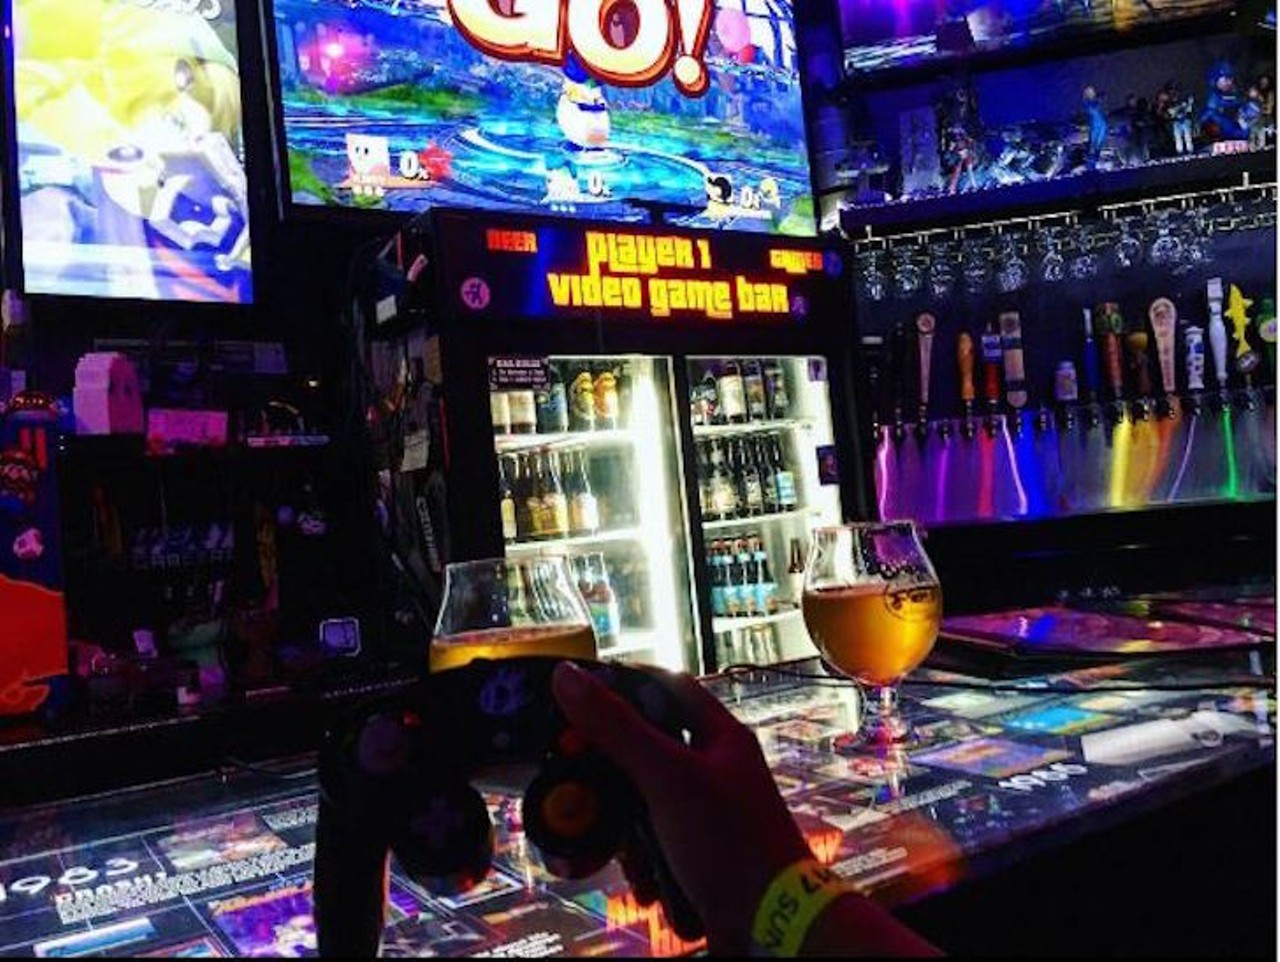 Combine booze and video games at Player 1
8562 Palm Pkwy, Orlando, 407-504-7521
Gaming and drinking come together in the best way at Player 1 Video Game Bar. Drink your favorite ale and play anything from Playstation 4 to classic arcade games all for a cover charge of $5.
Photo via cindymimi13/Instagram